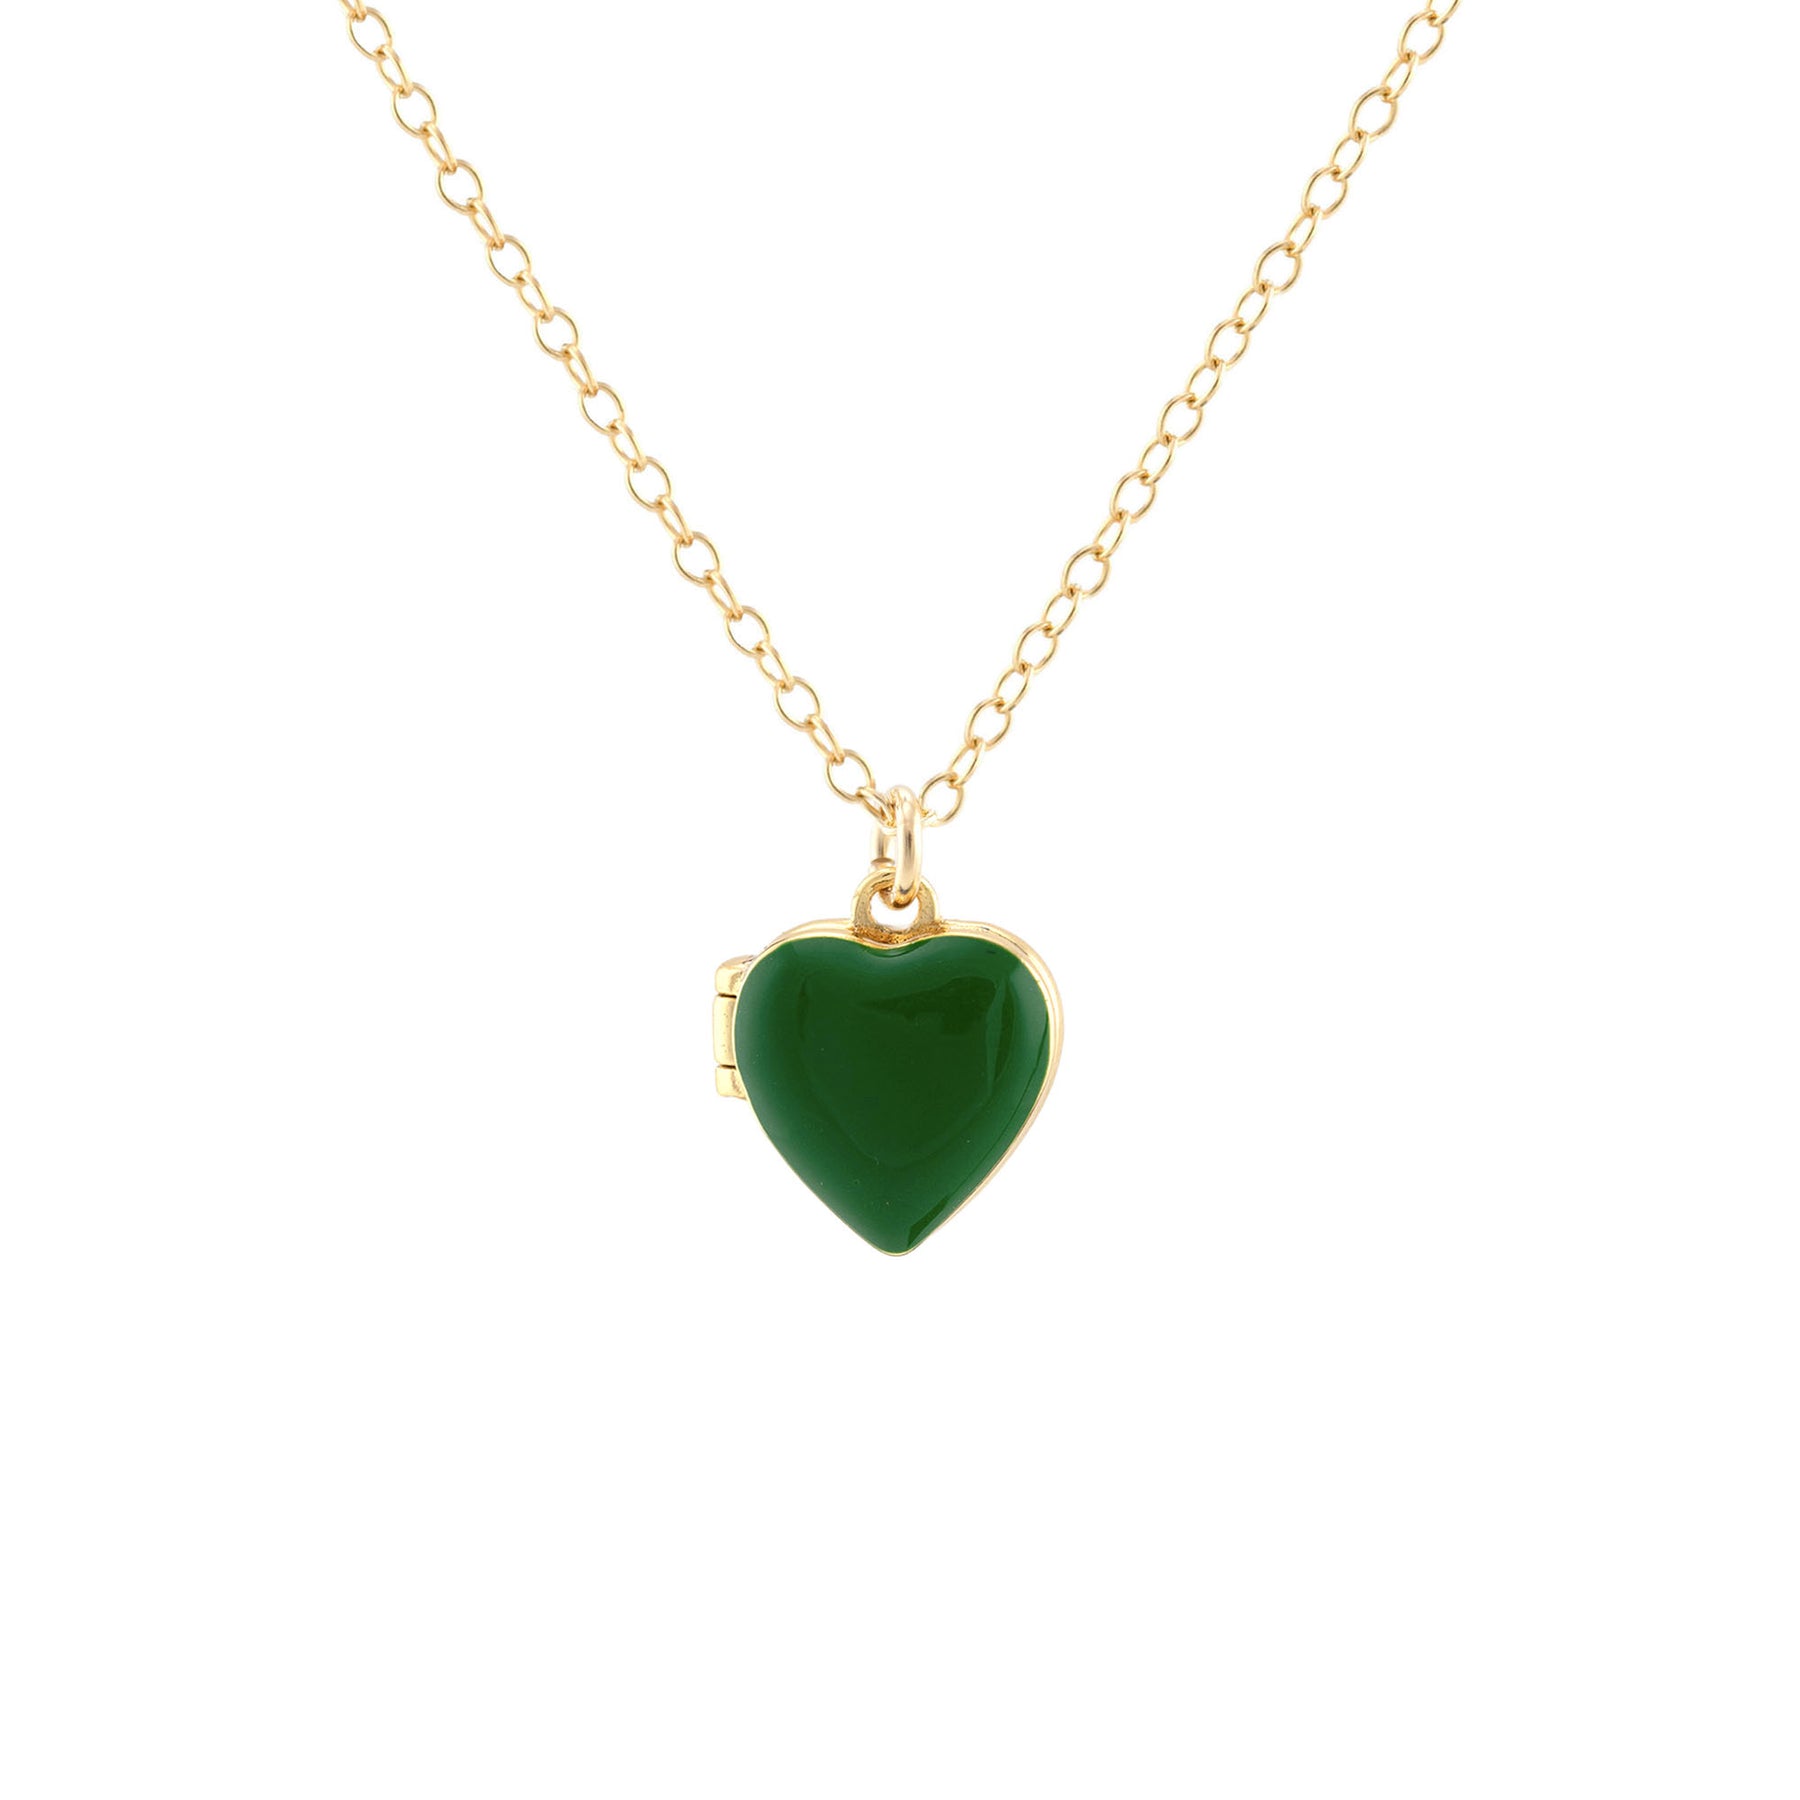 Appealing Green Heart Love Pendant With Chain